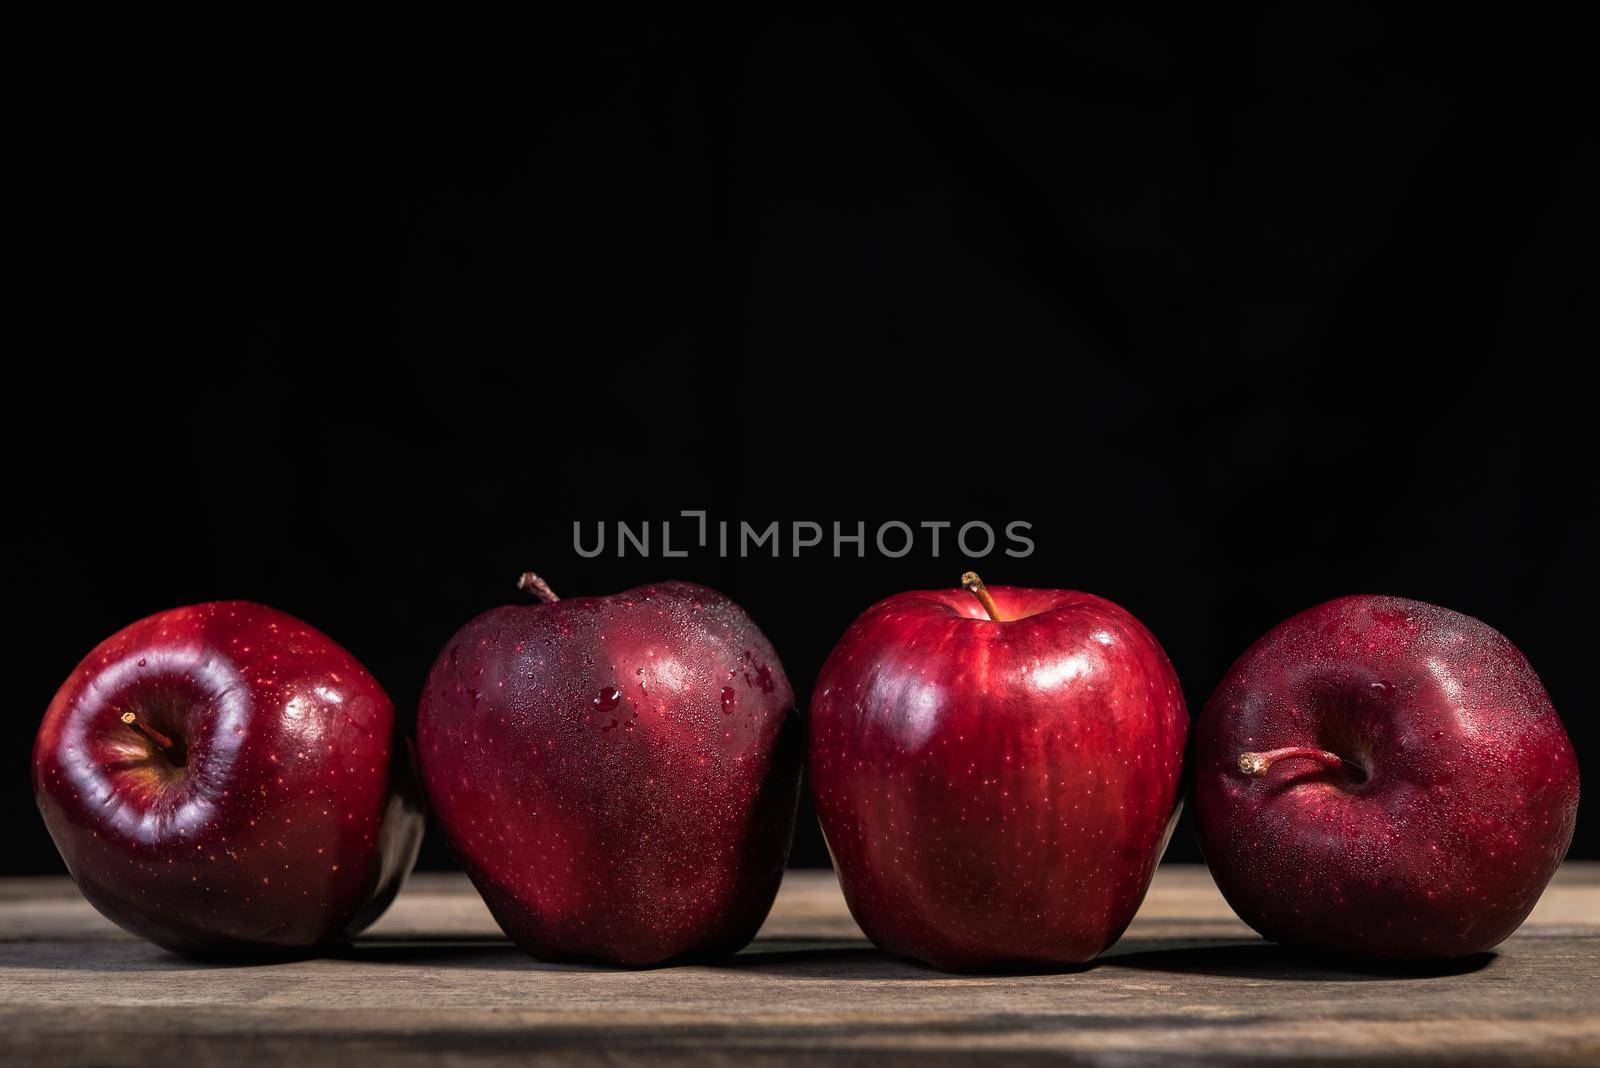 Red apple on wood table, black background